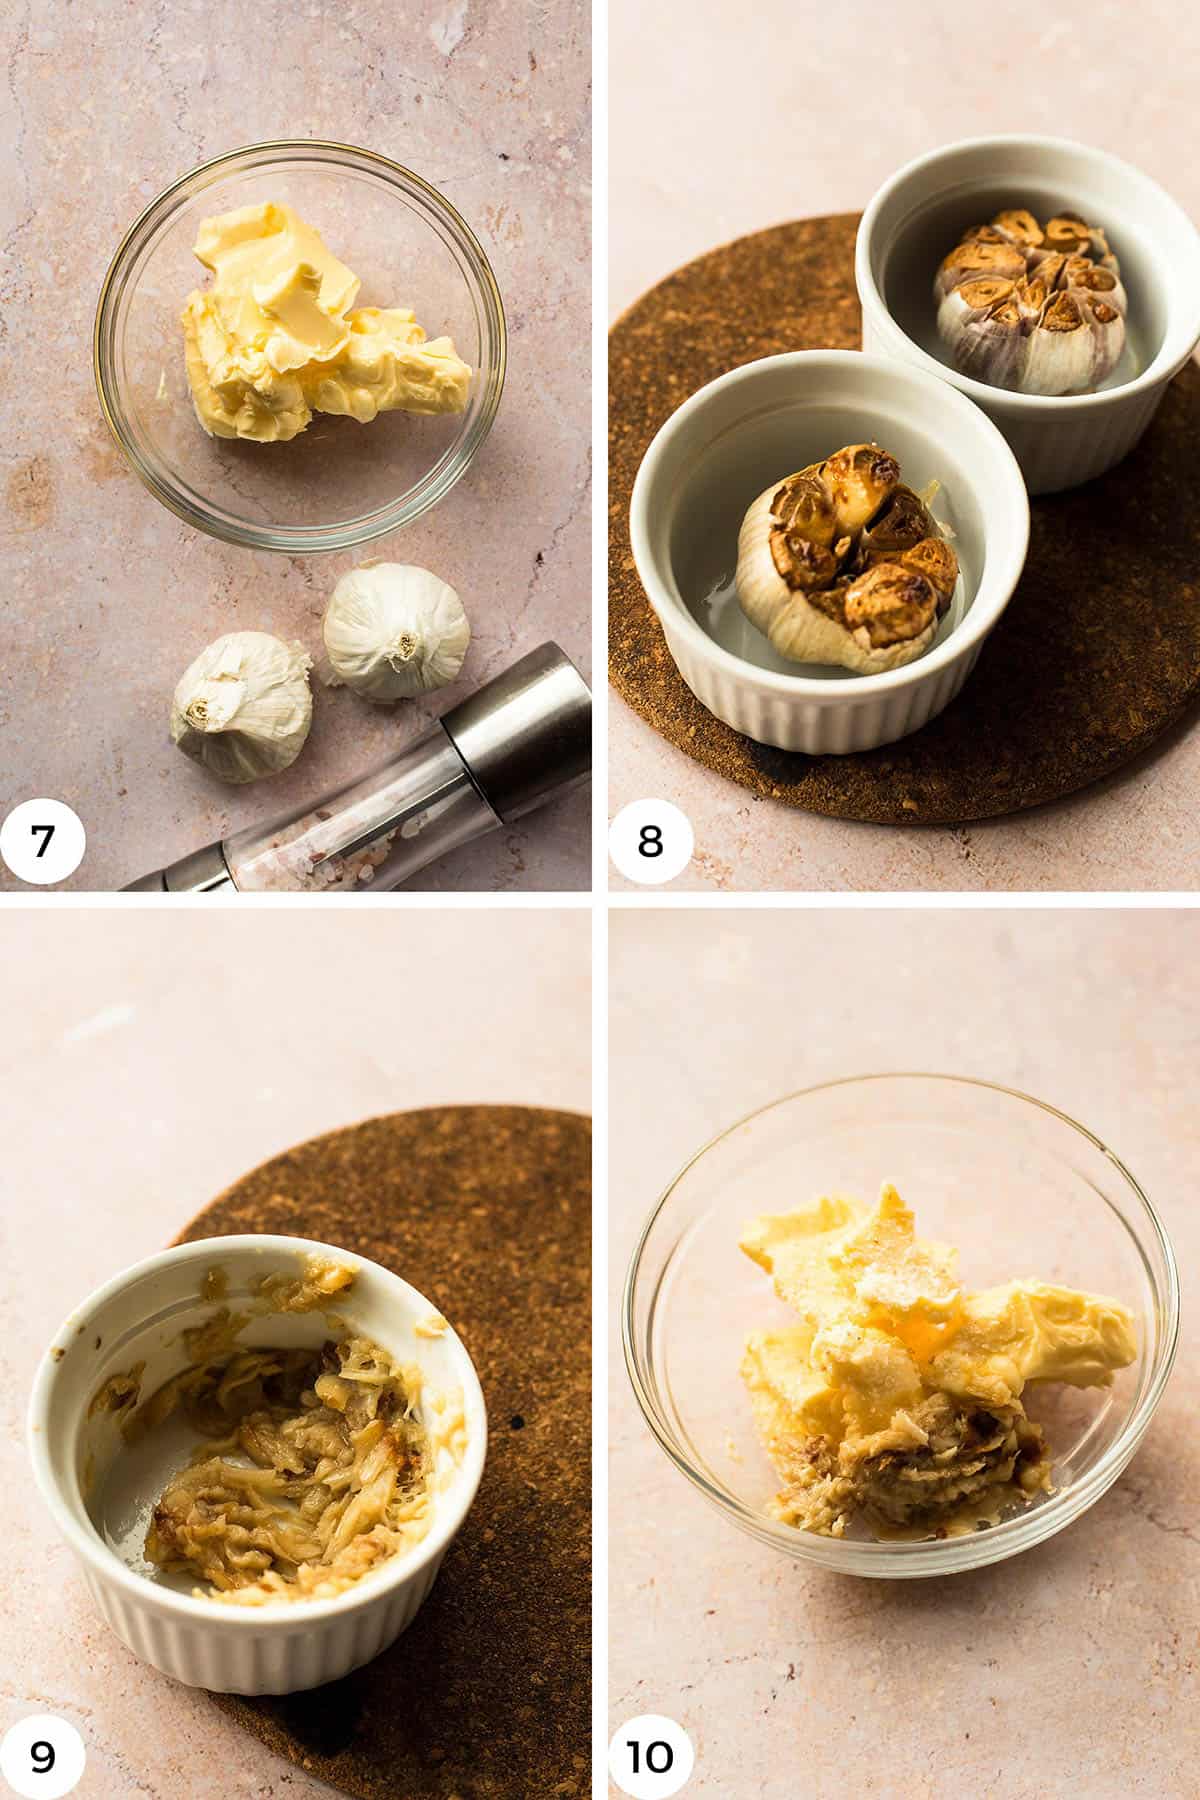 Steps to make roasted garlic compound butter.